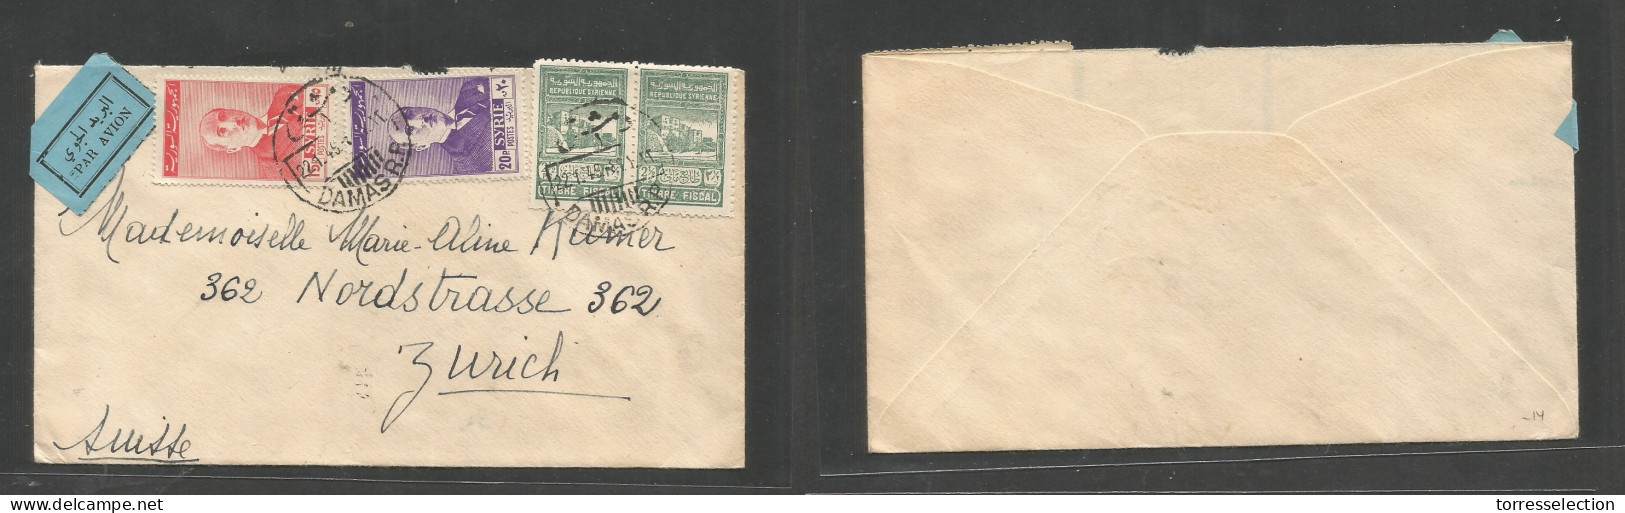 SYRIA. 1949 (22 Jan) Damas - Switzerland, Zurich. Air Multifkd Env Incl Two Fiscal Stamps, Tied Cds. VF Used. - Syrie